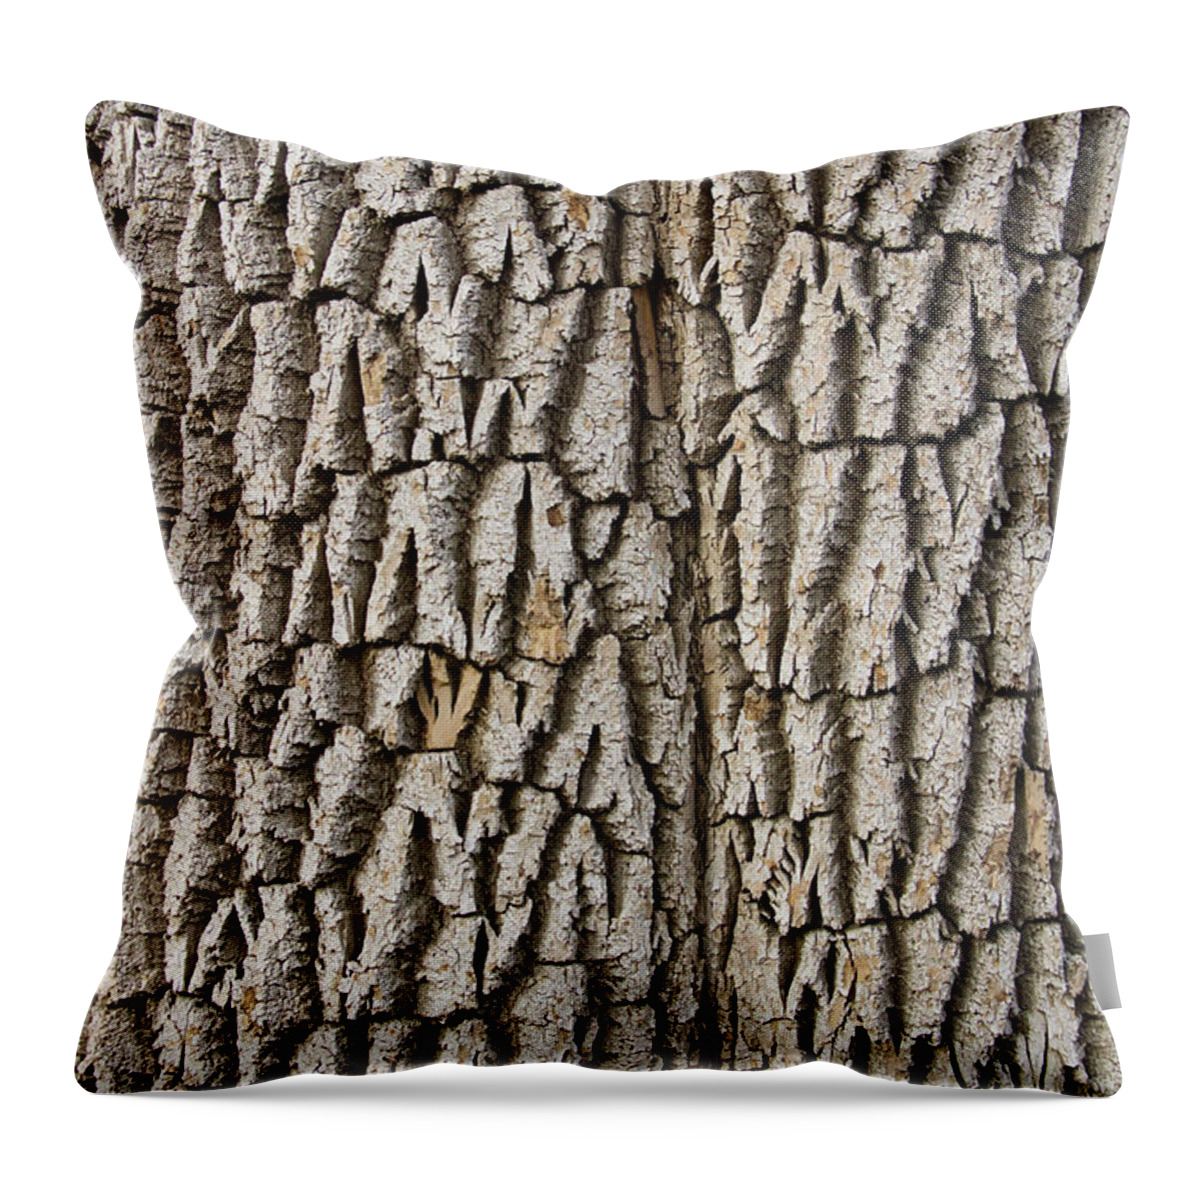 Texture Prints Throw Pillow featuring the photograph Cottonwood Tree Texture Print by James BO Insogna